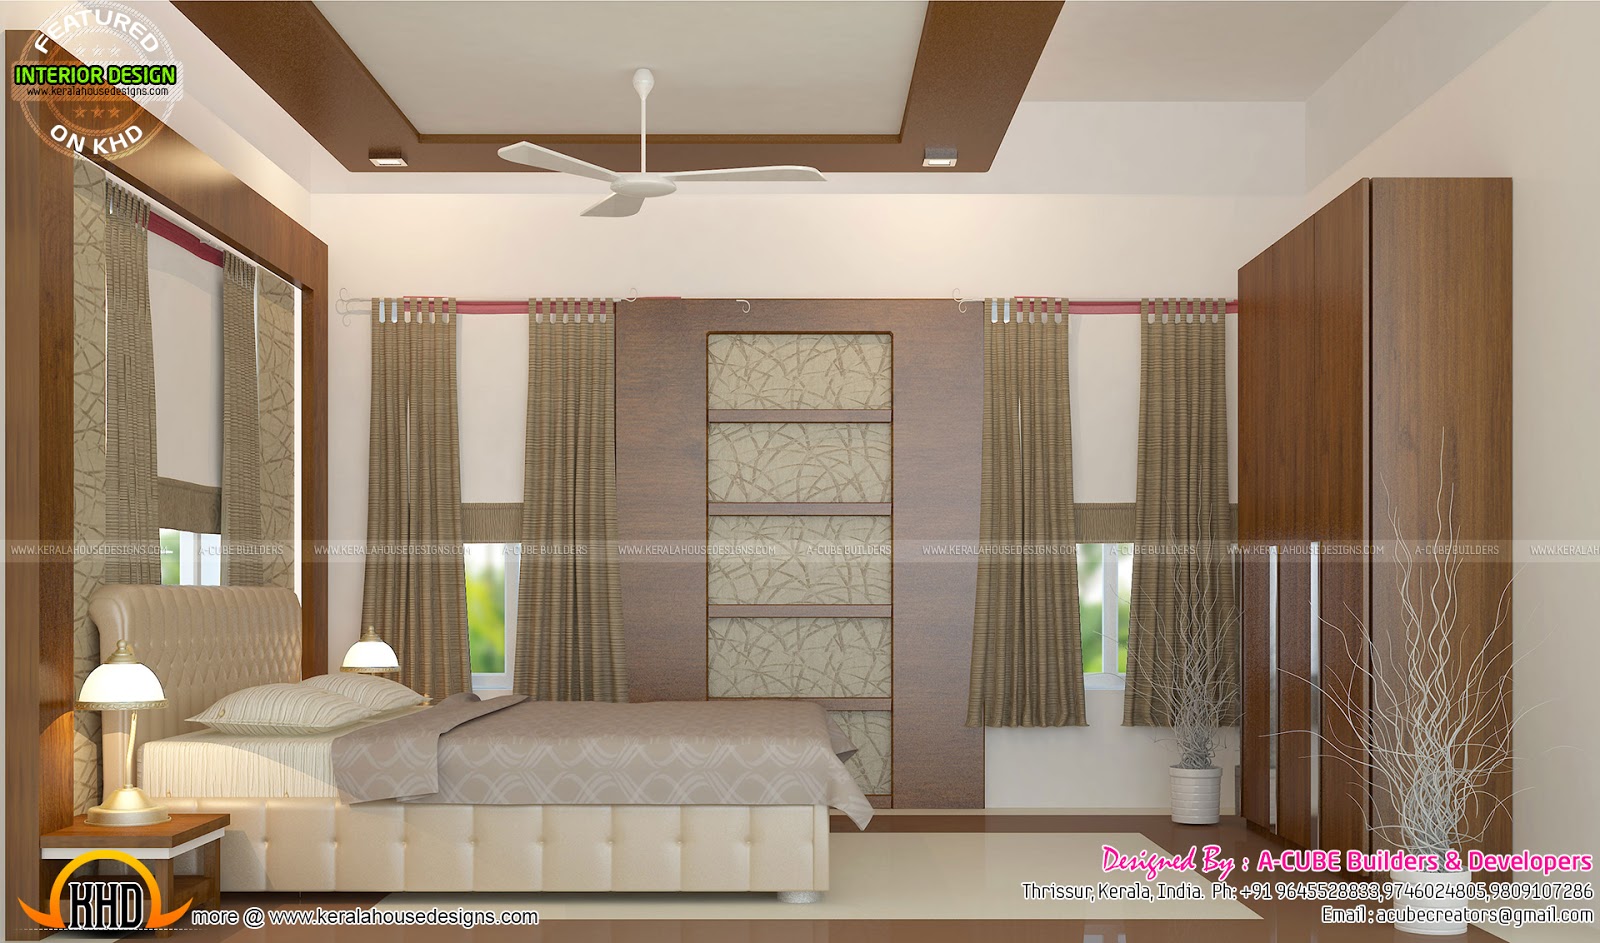 Kitchen And Master Bedroom Designs Kerala Home Design And